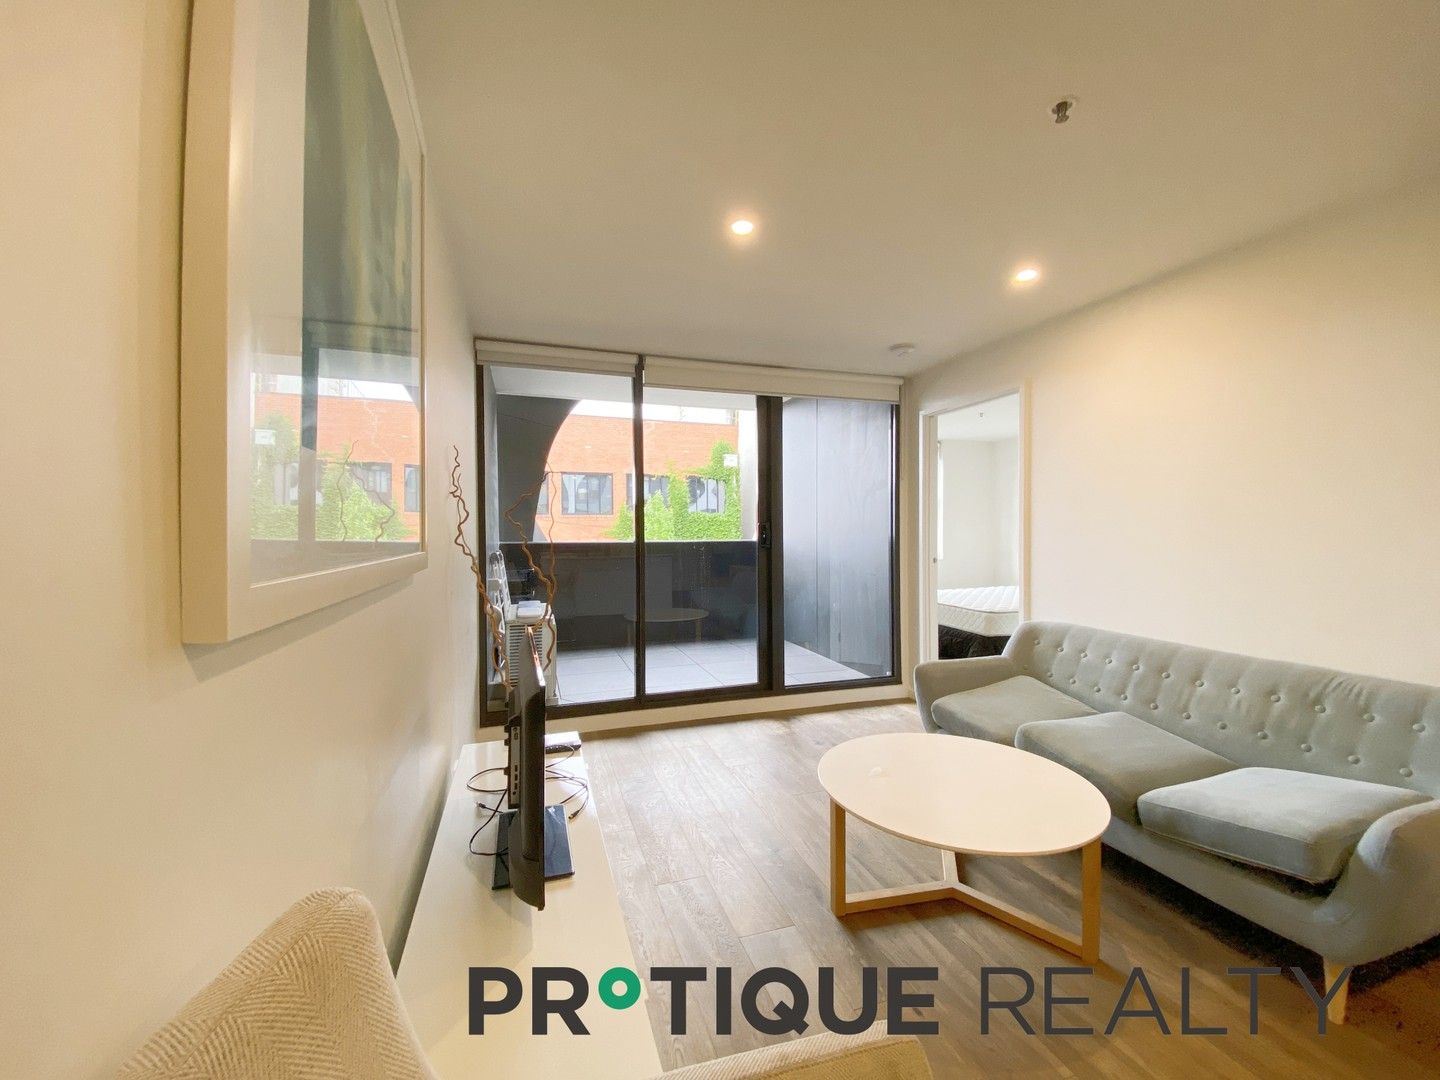 2 bedrooms Apartment / Unit / Flat in 103/37 Breese St BRUNSWICK VIC, 3056